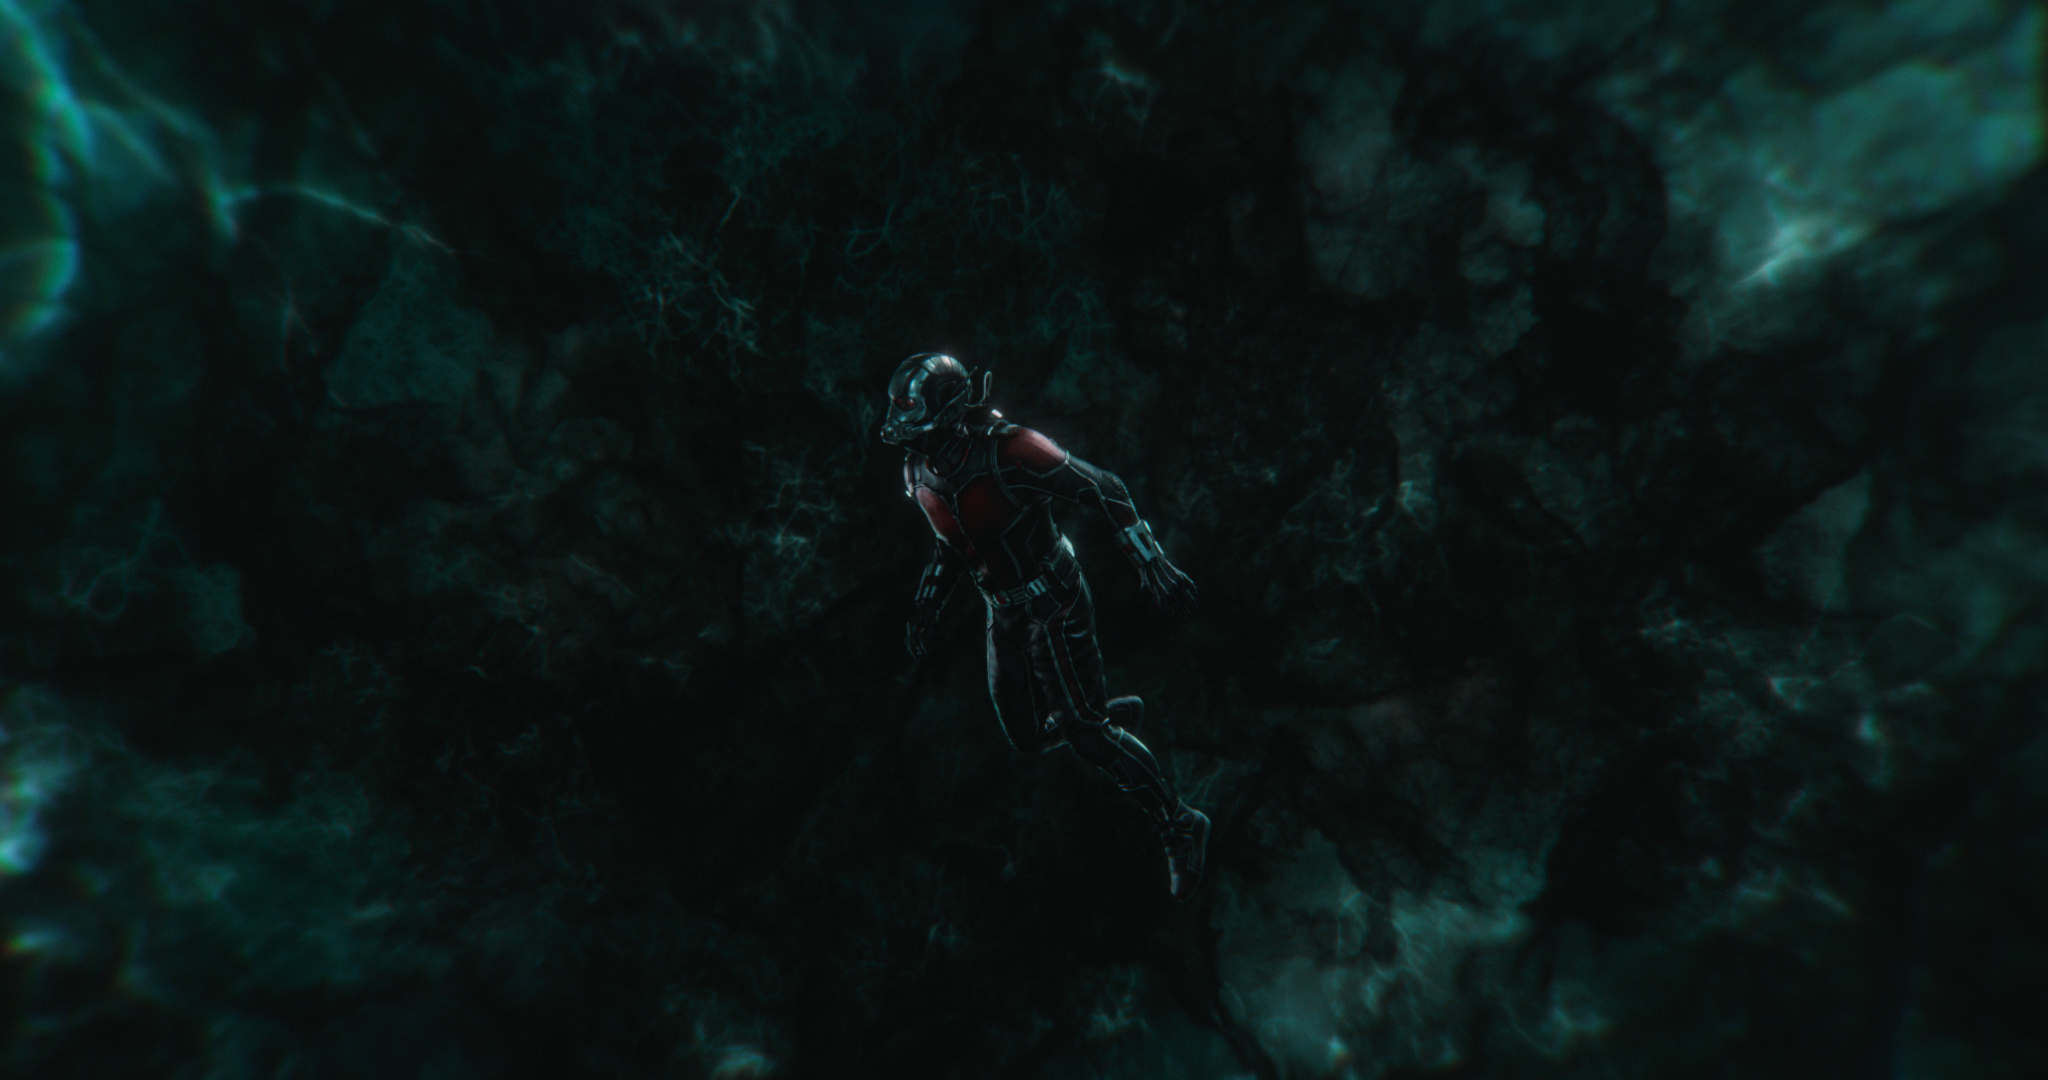 Ant-Man/Scott Lang (Paul Rudd) in the Quantum Realm in <i>Ant-Man and the Wasp</i> (Marvel Studios)